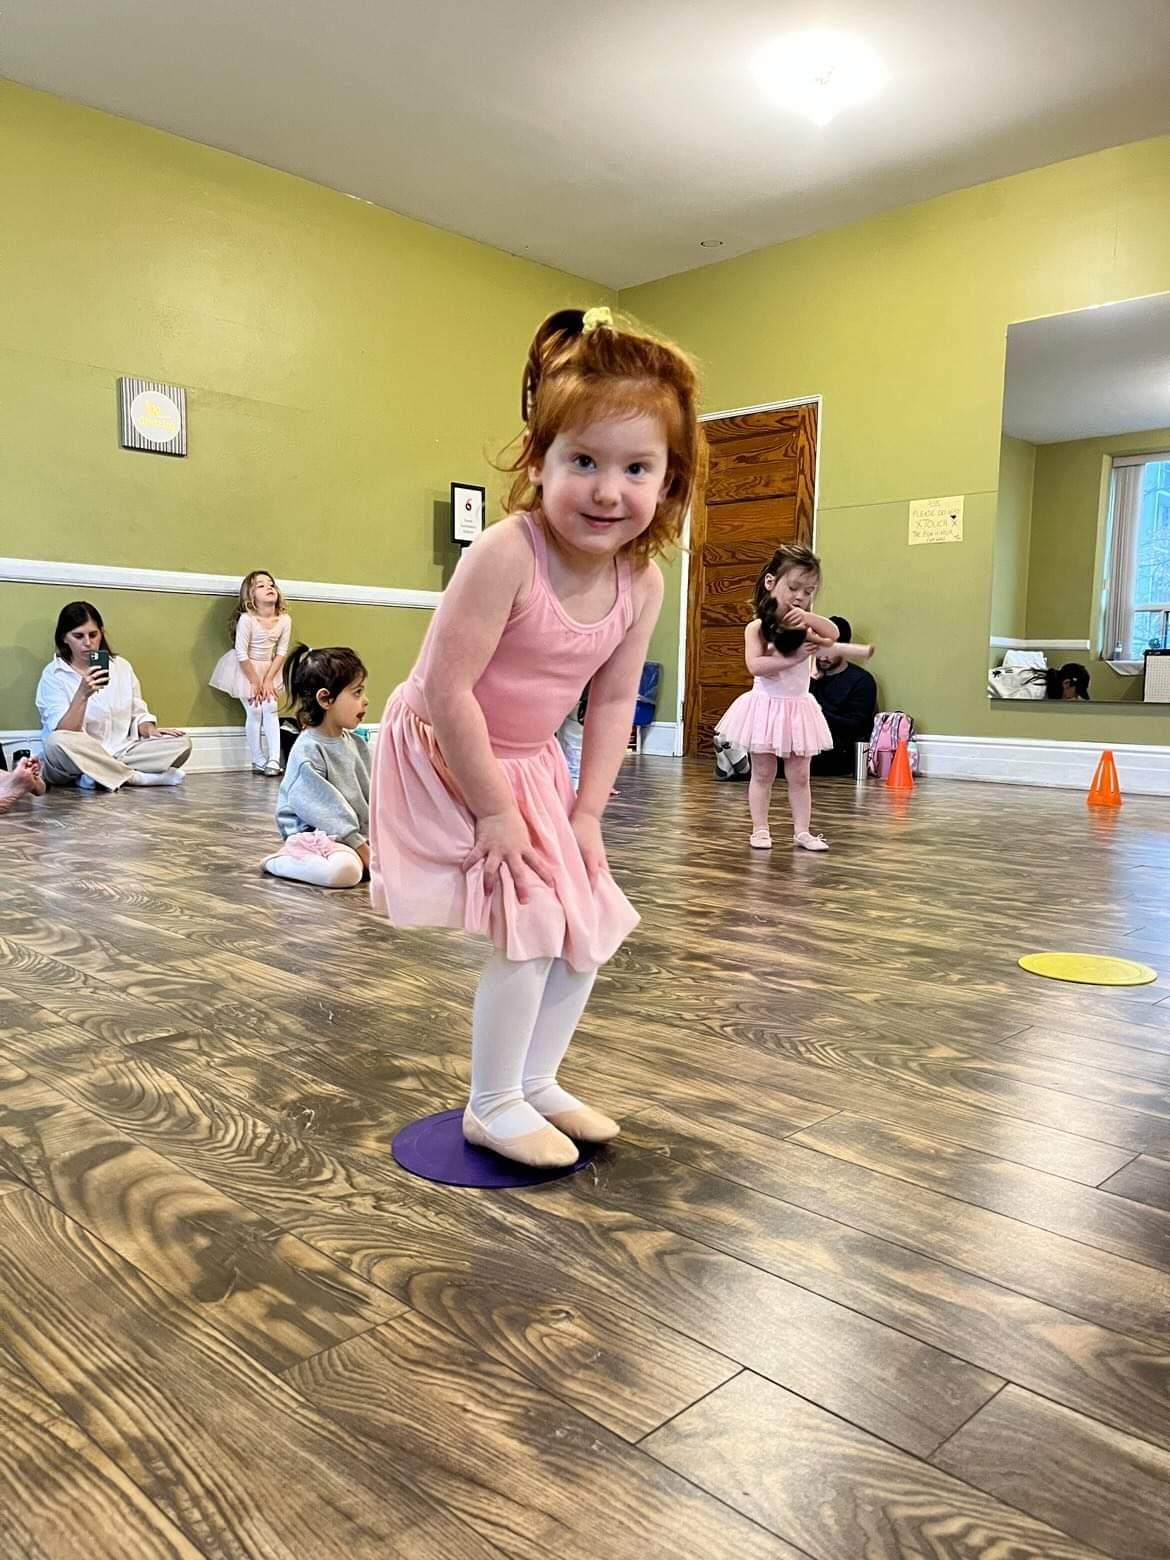 A toddler taking part in dance activities